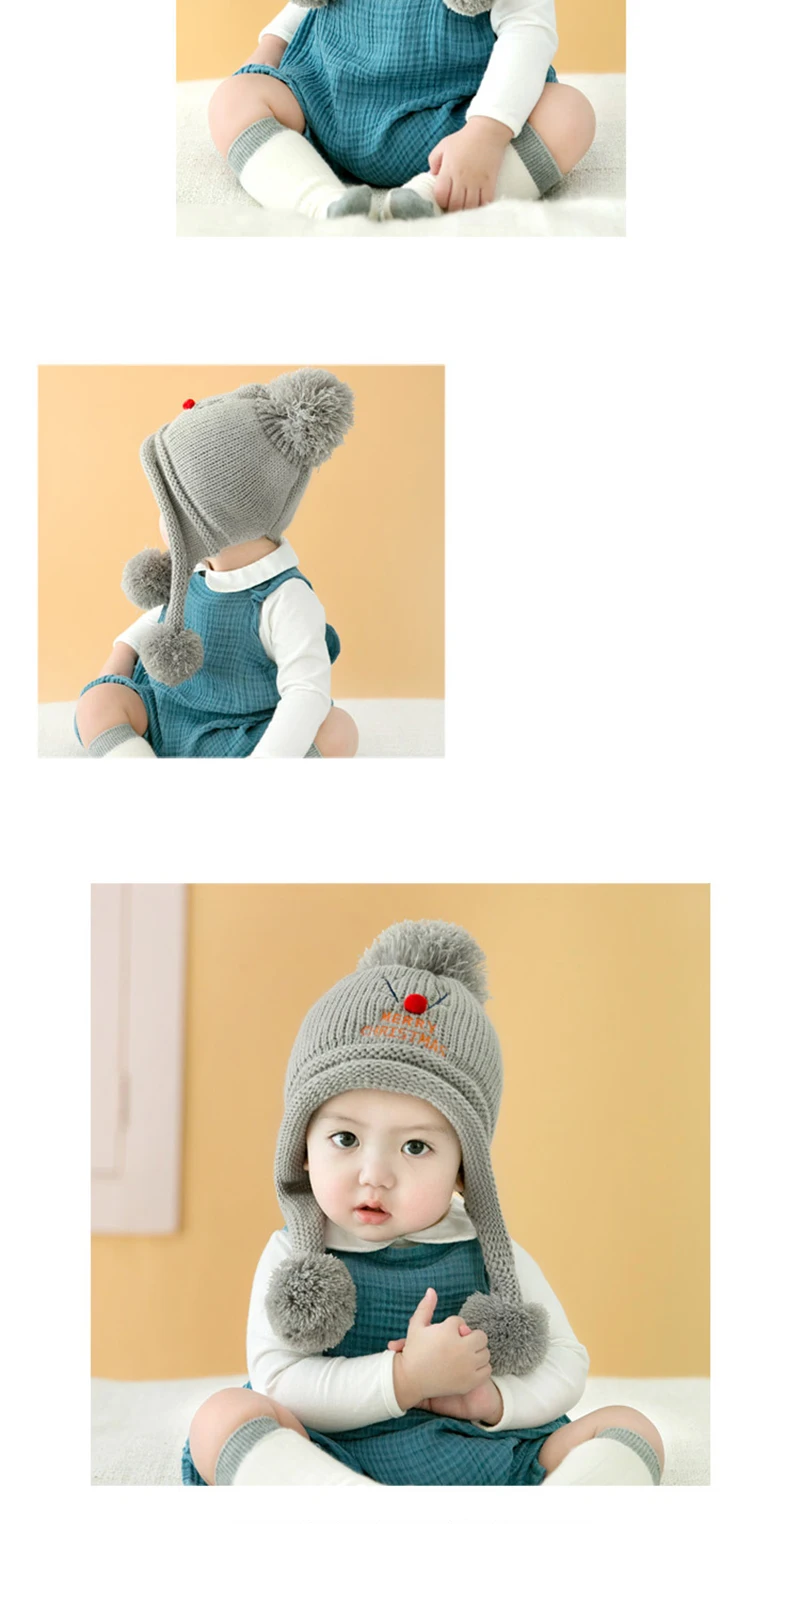 NEW Christmas Deer Baby Plush Hats With Pom Knitted Cotton Beanie Warm Caps Soft Hat For Newborn Girls Boys Bonnet Autumn Winter